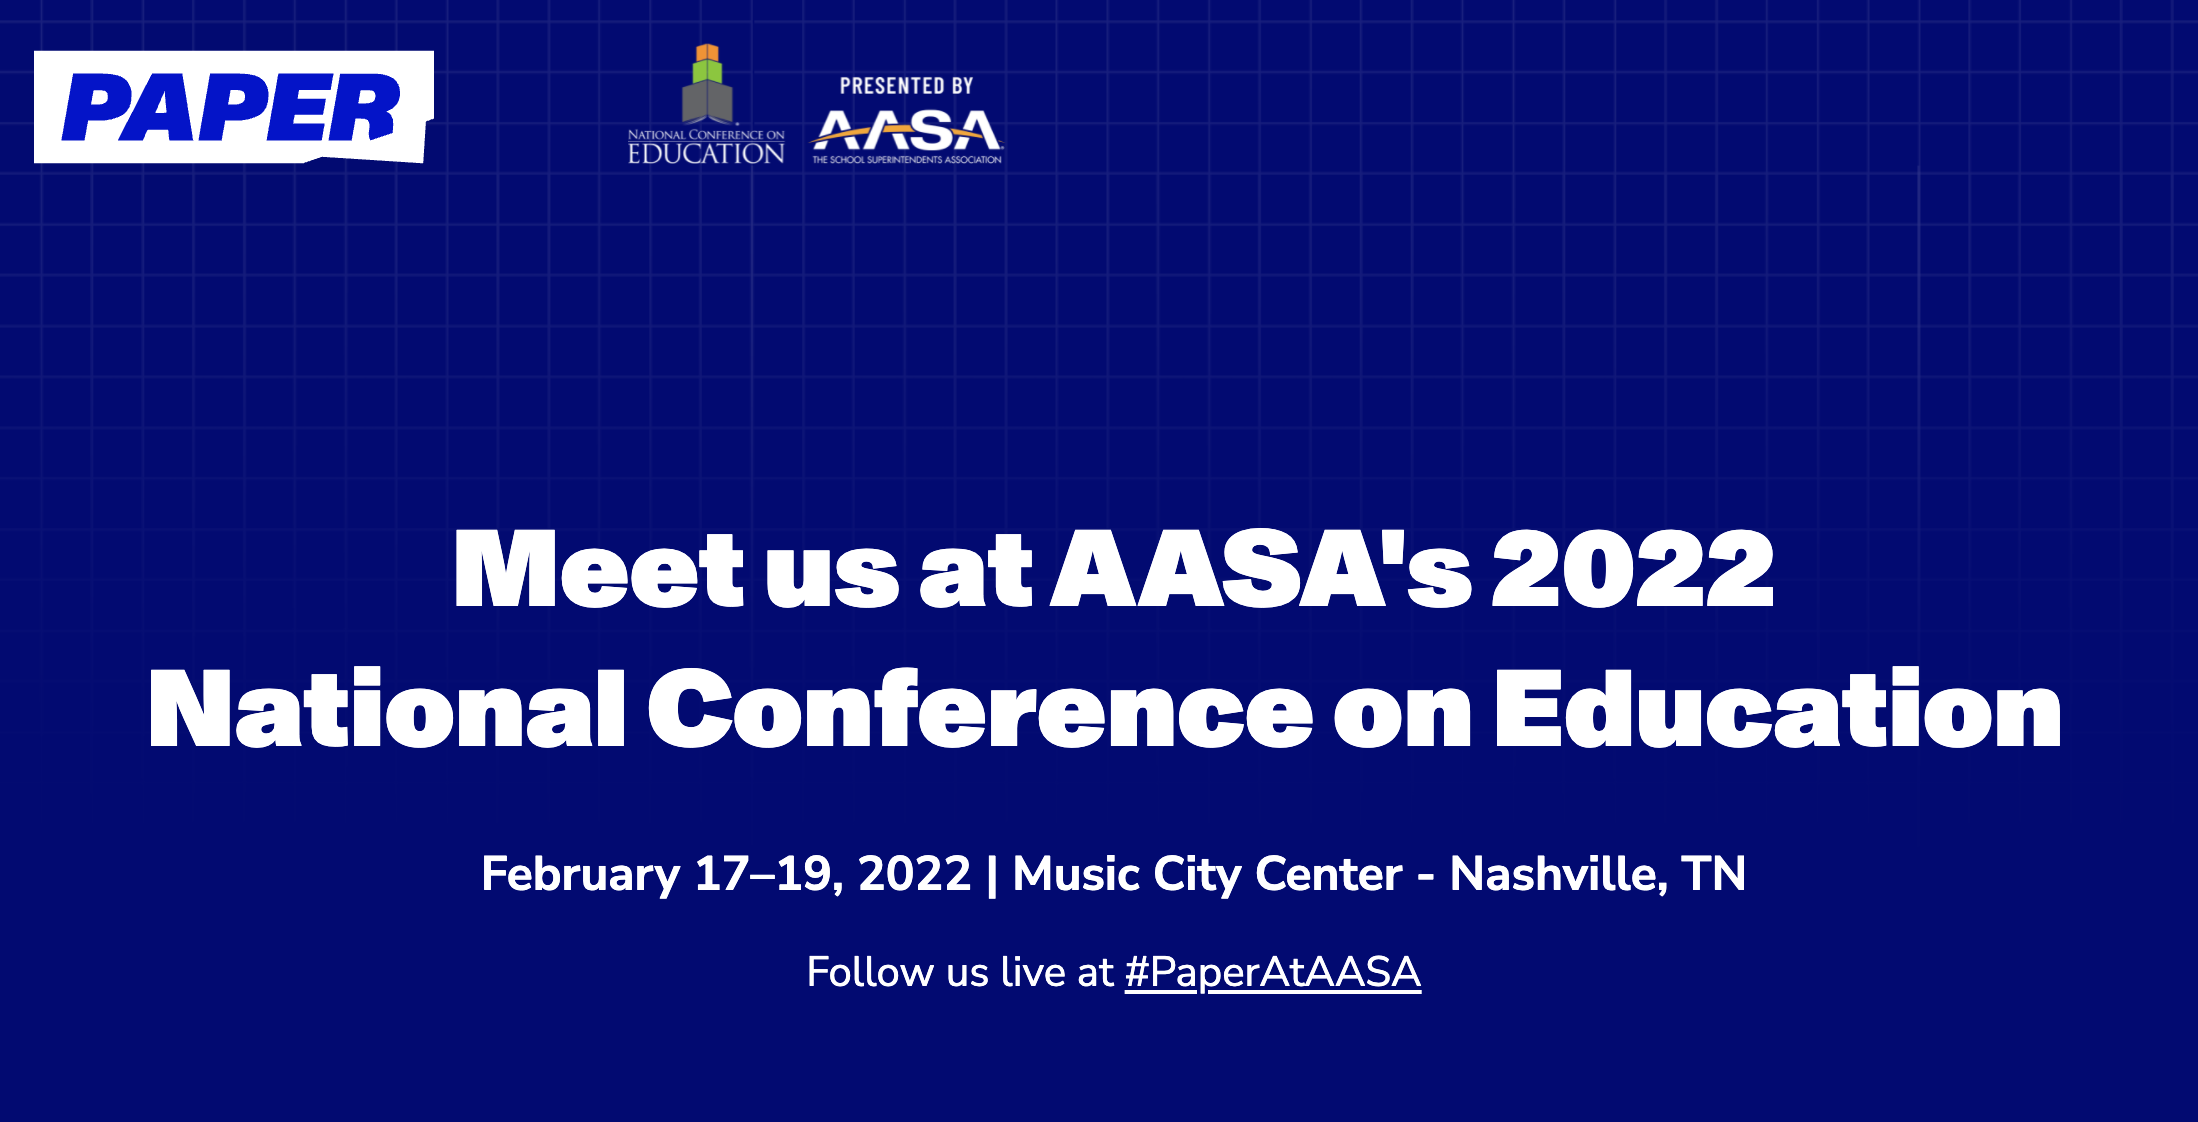 Paper AASA's 2022 National Conference on Education